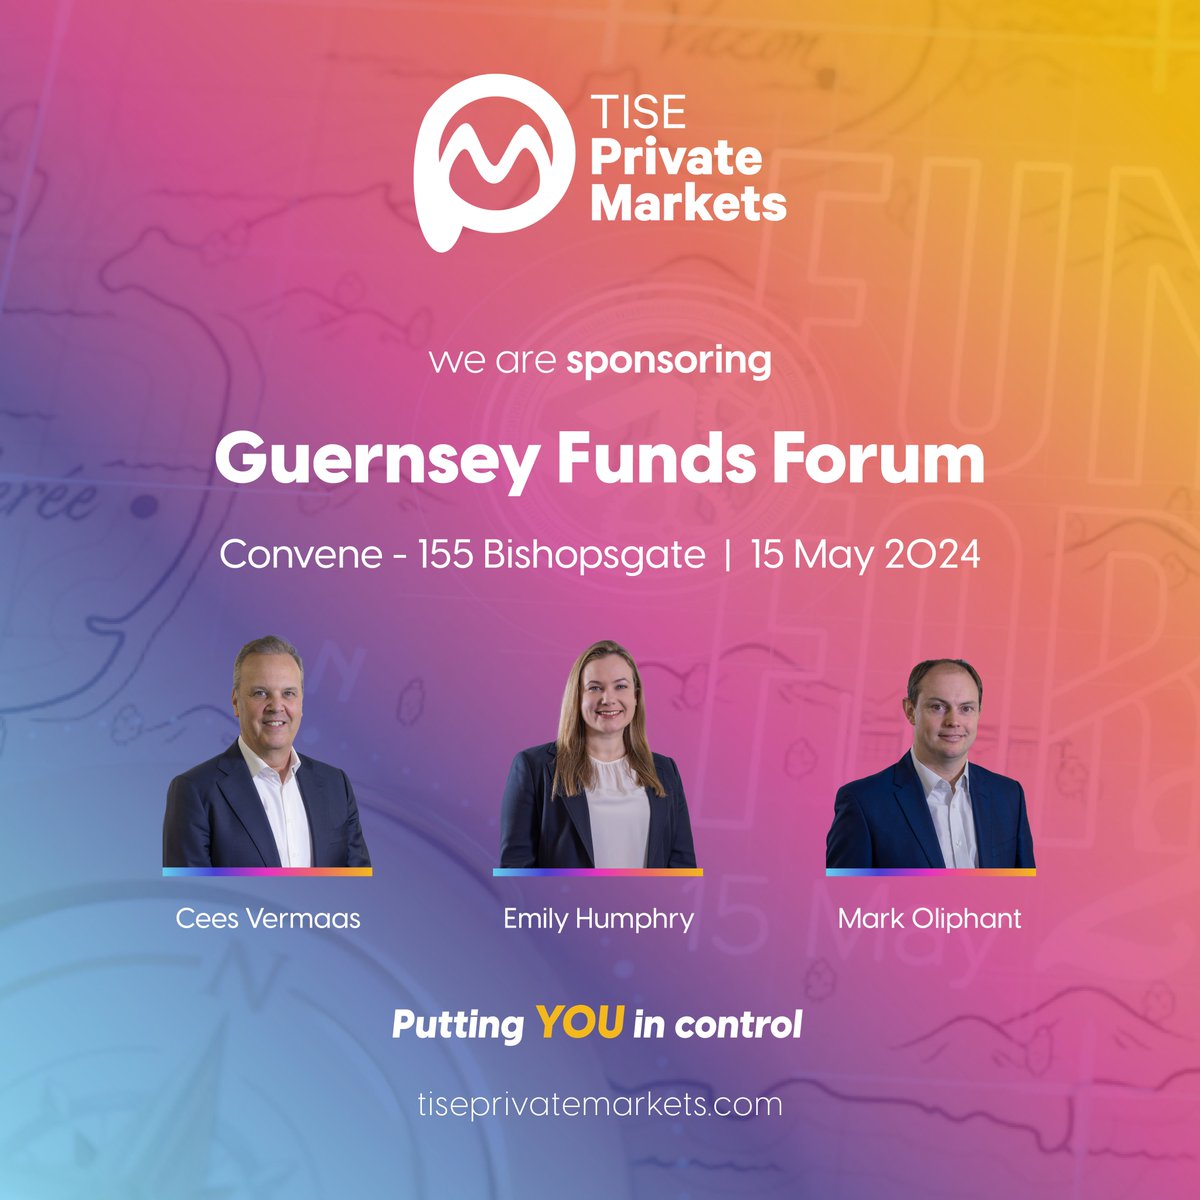 We’re delighted that TISE Private Markets is the coffee sponsor at this year’s Guernsey Funds Forum!

Cees, Emily & Mark are attending this event so if you have any questions then either visit our stand or catch up with them around the event.

#GuernseyFinance #privatemarkets